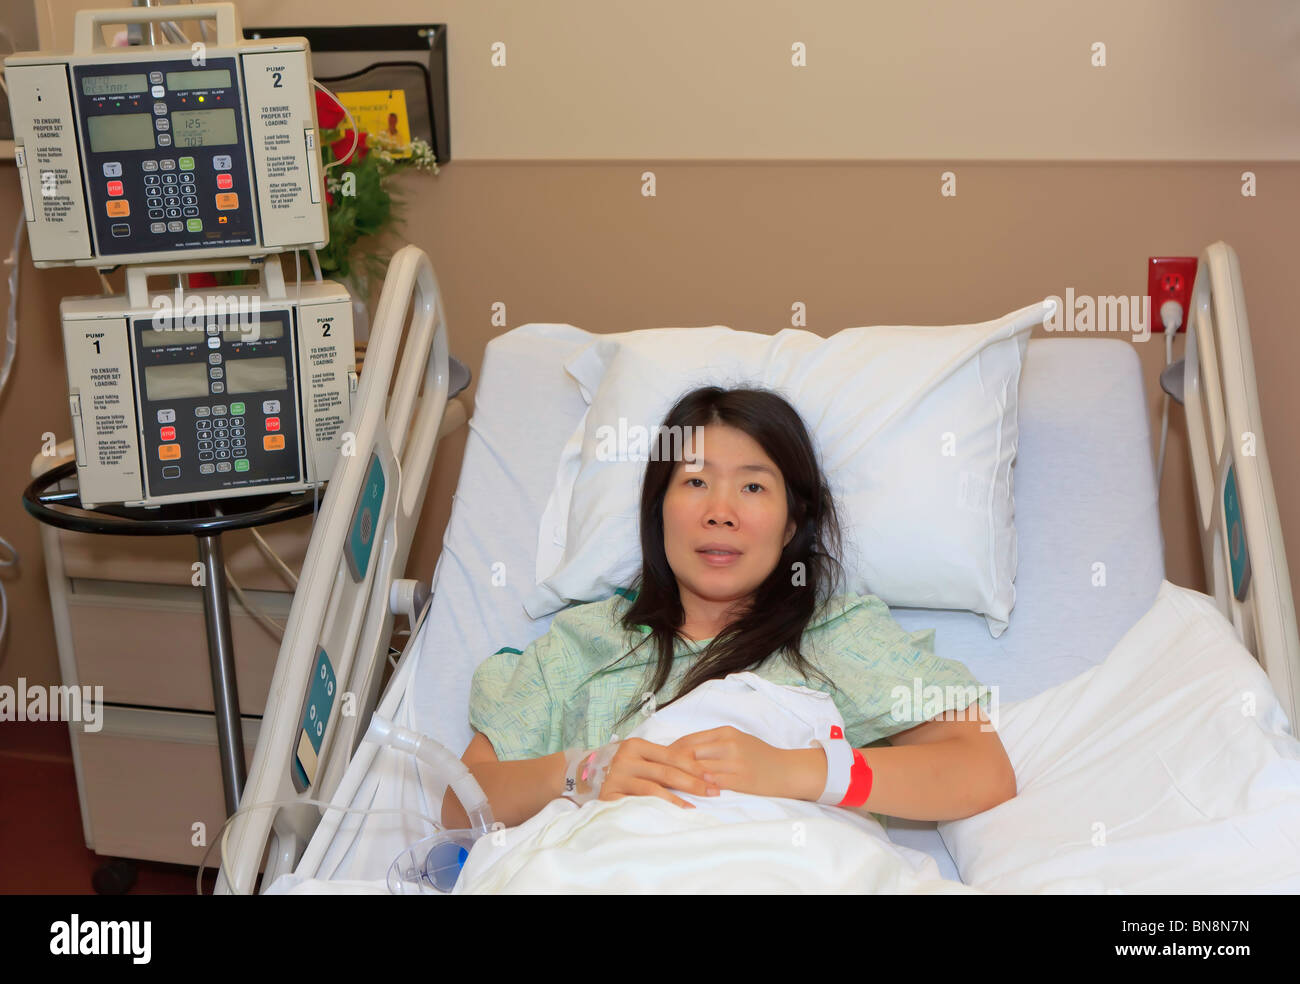 Asian Woman in hospital Bed Banque D'Images